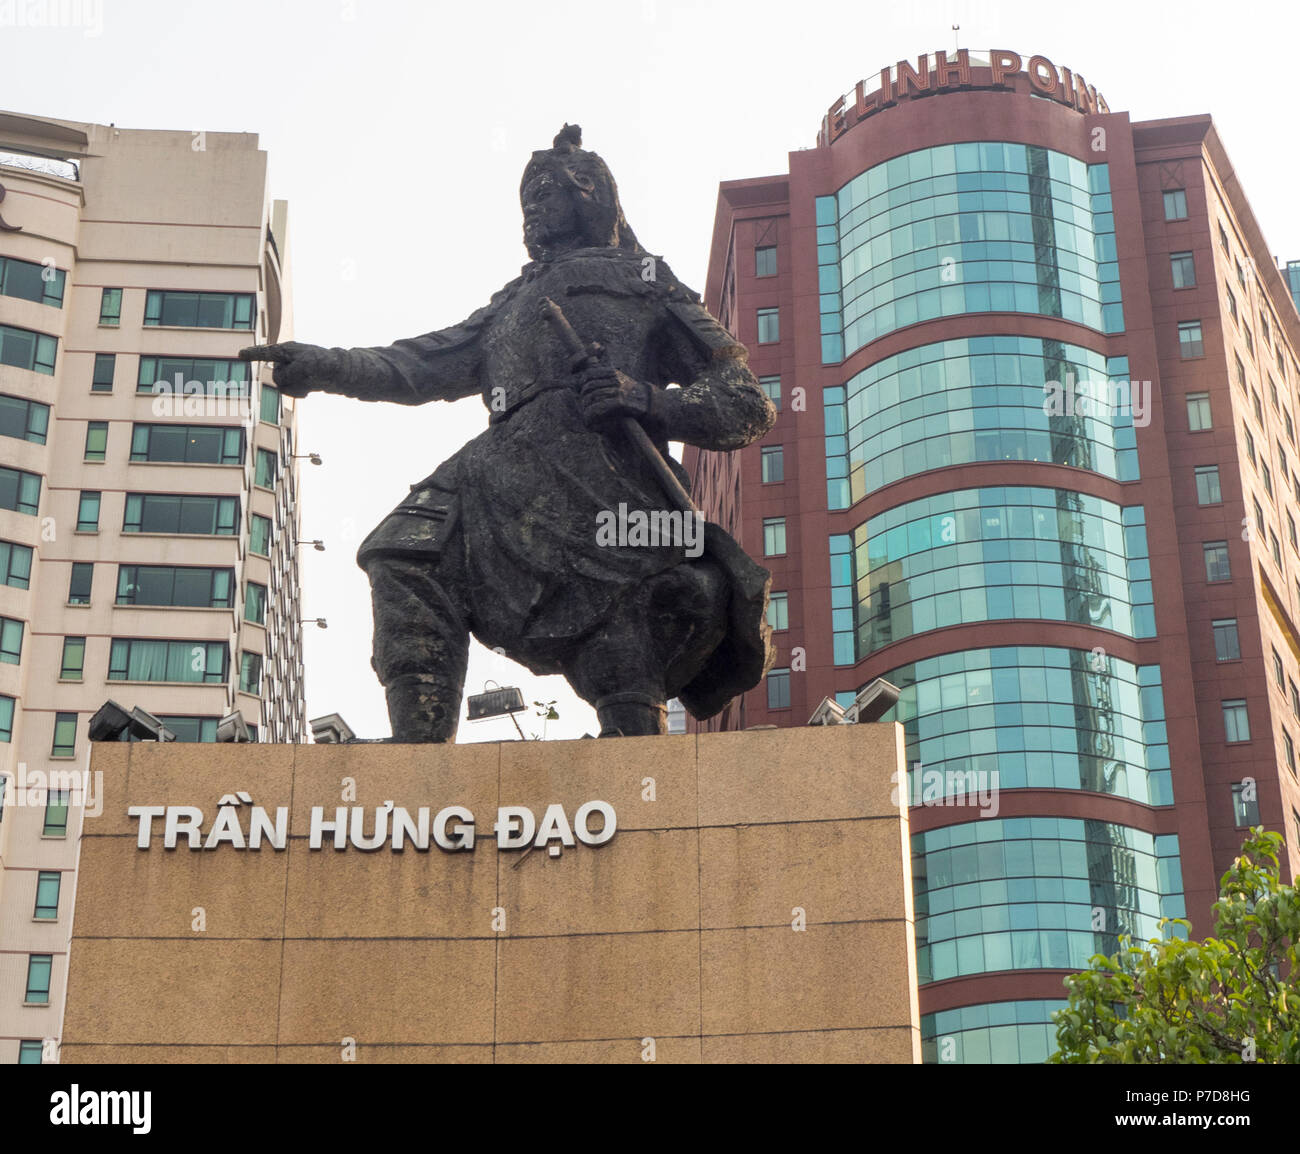 Statue of Vietnamese national hero Tran Hung Doa in Me Line Square on the banks of the Saigon River, Ho Chi Minh City, Vietnam. Stock Photo